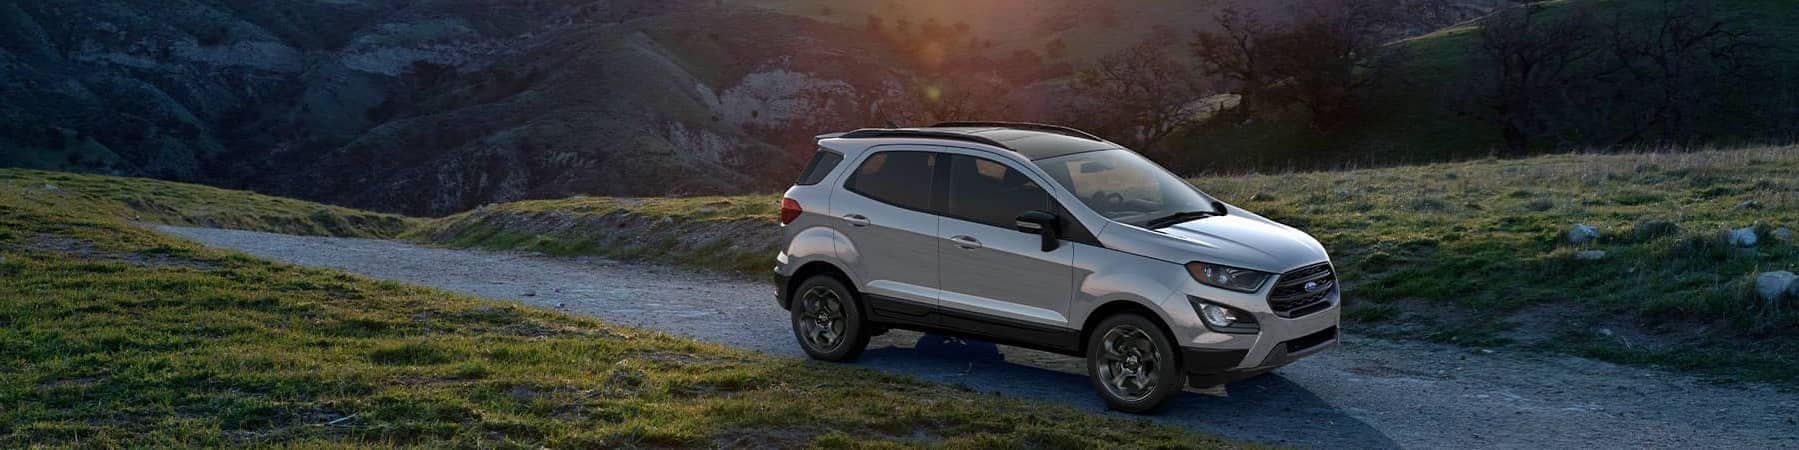 Silver 2021 Ford EcoSport overlooking the sunset behind a mountain range